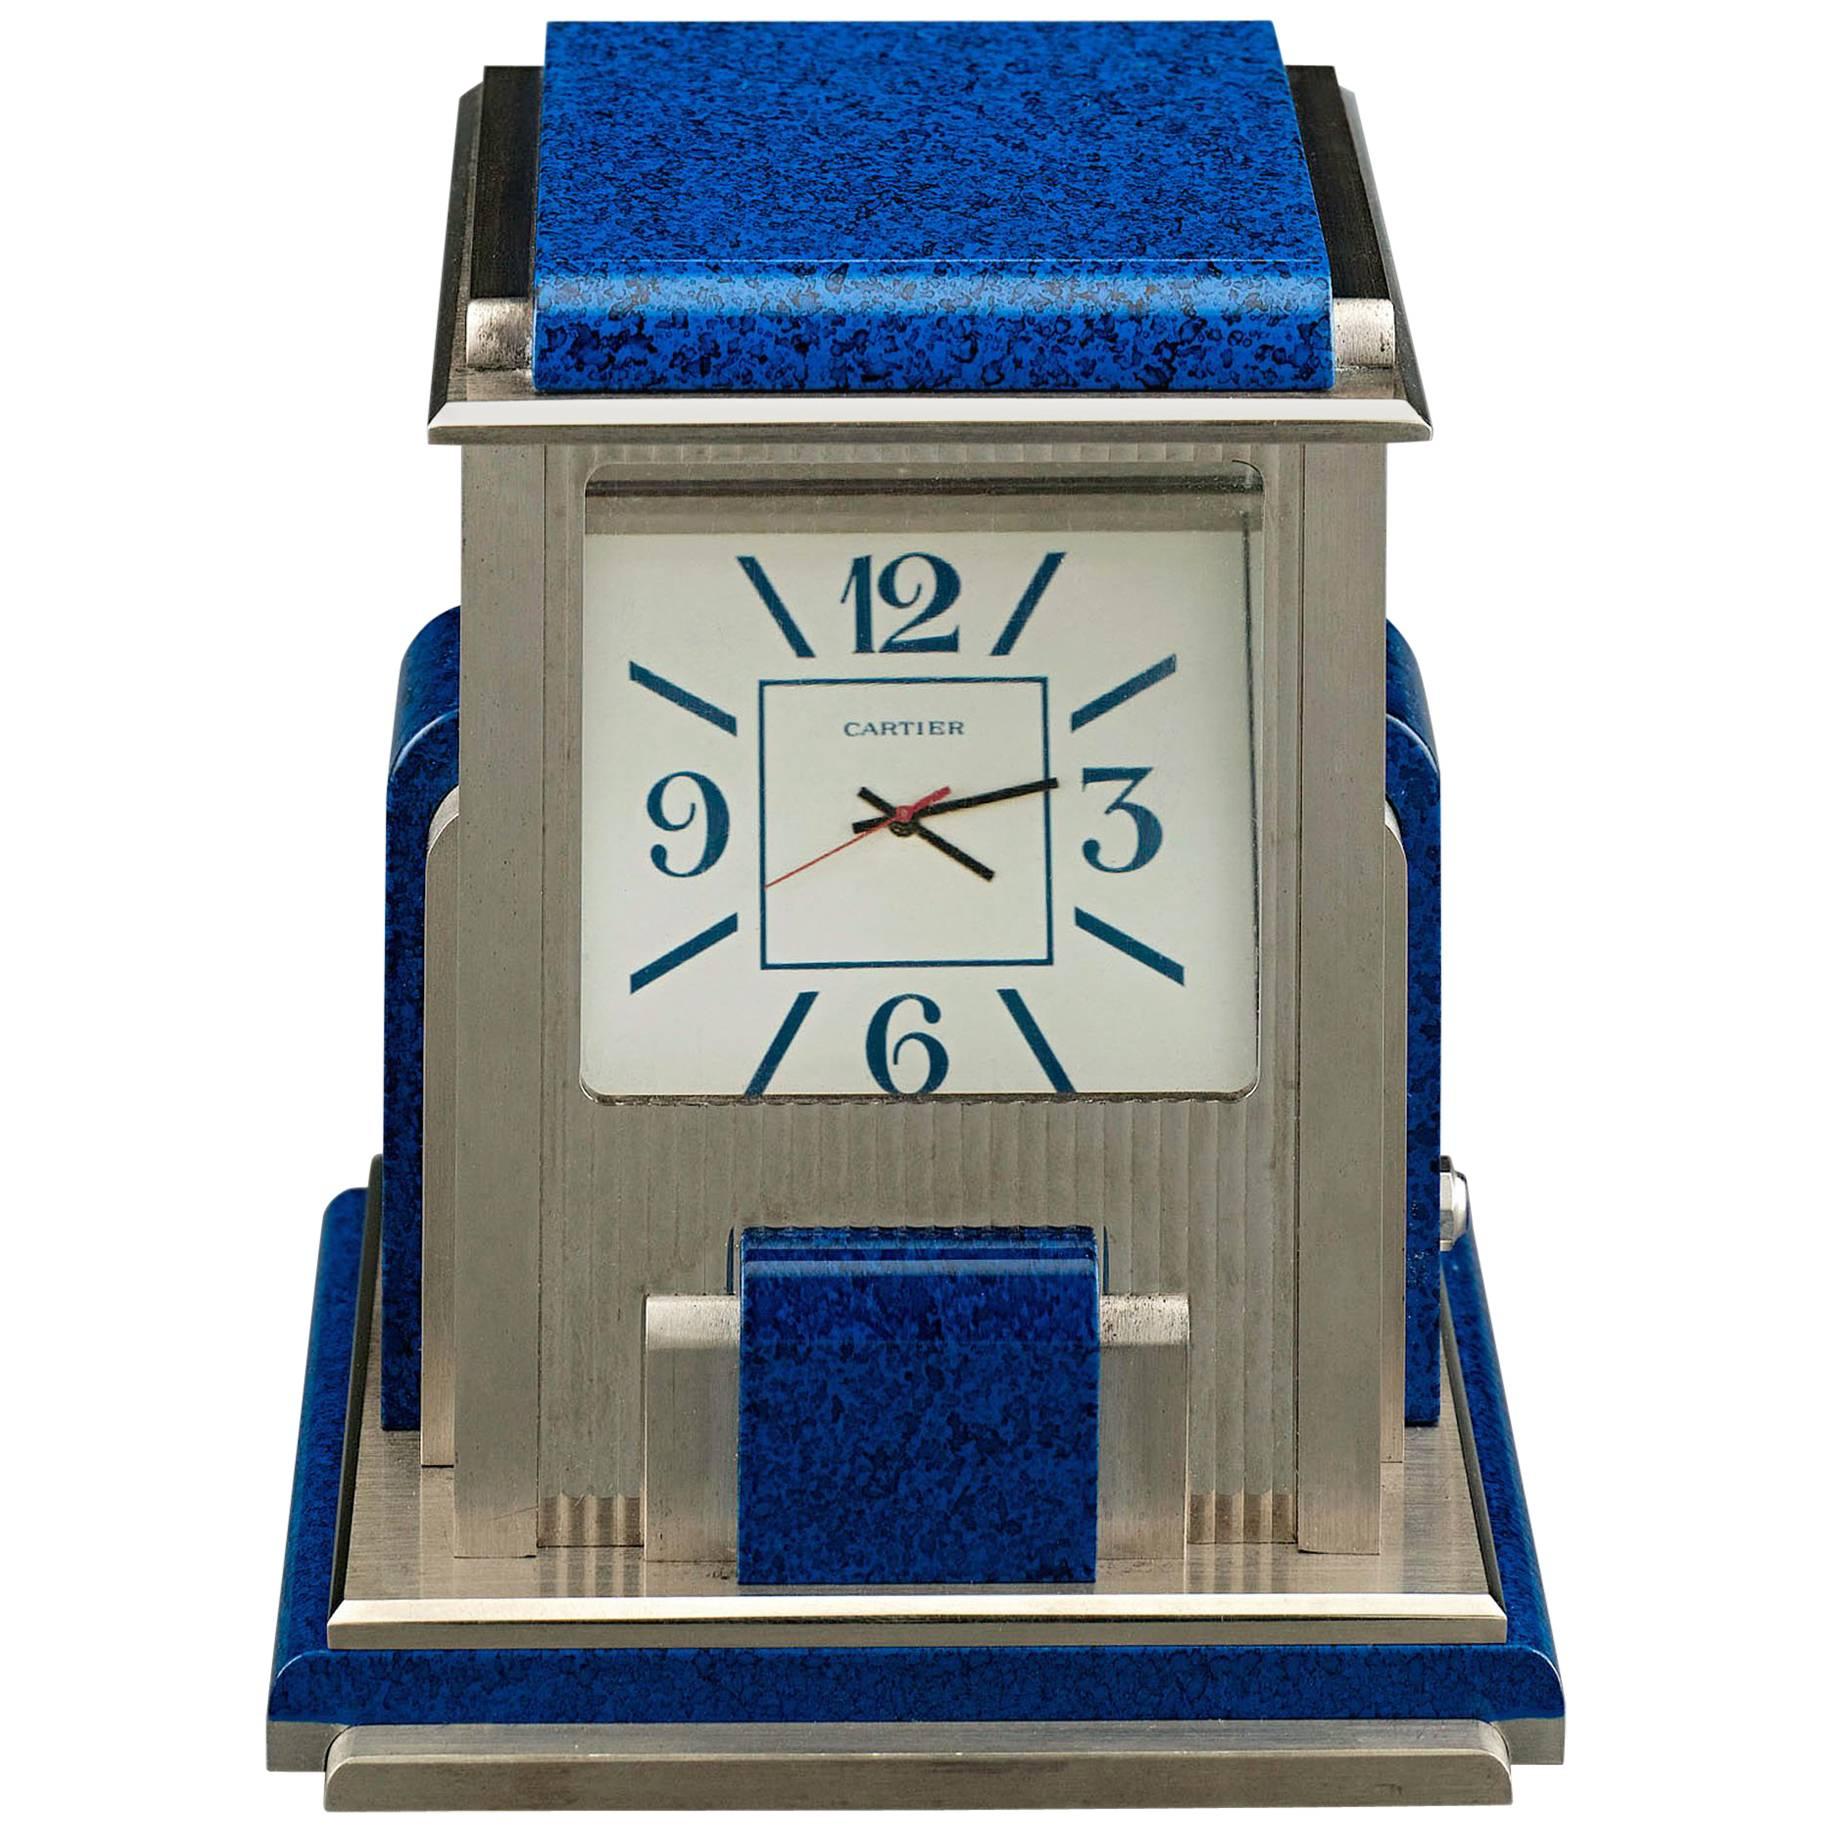 Cartier Prism Mystery Clock